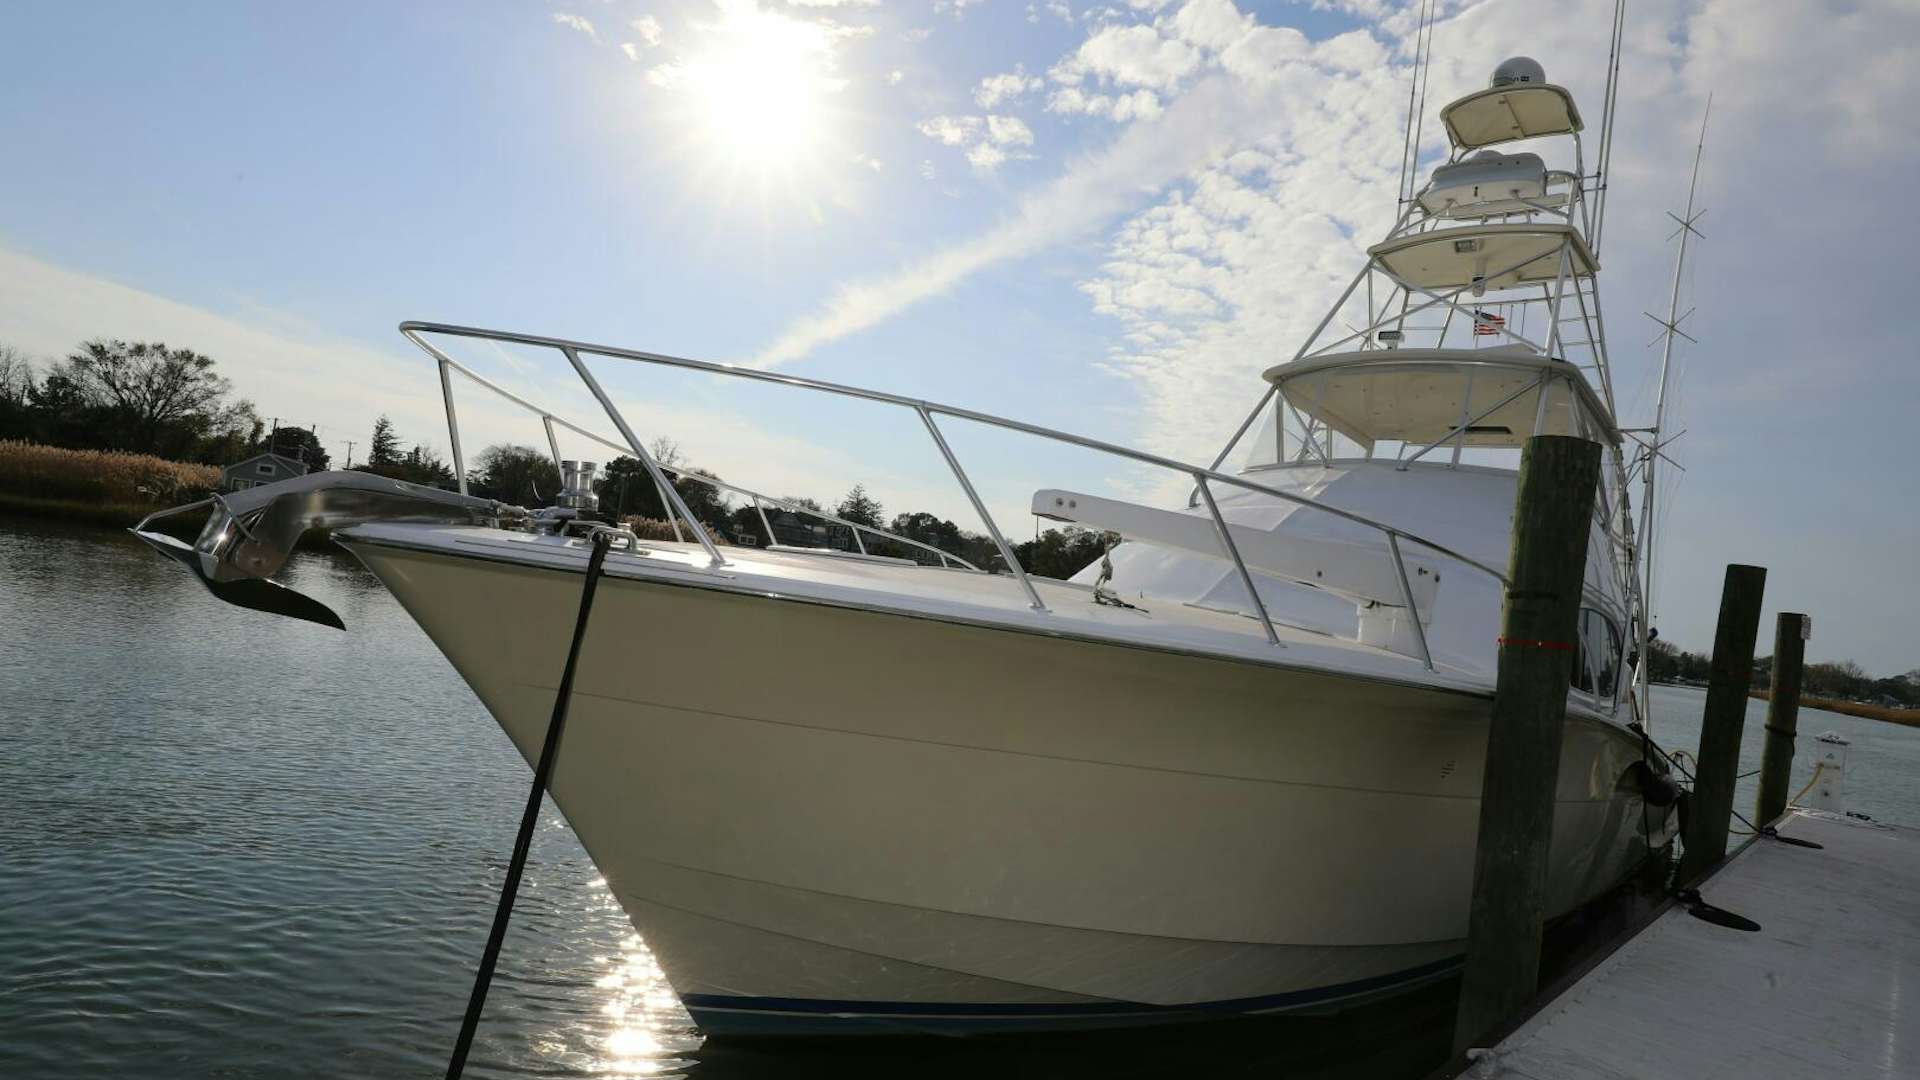 See legs
Yacht for Sale